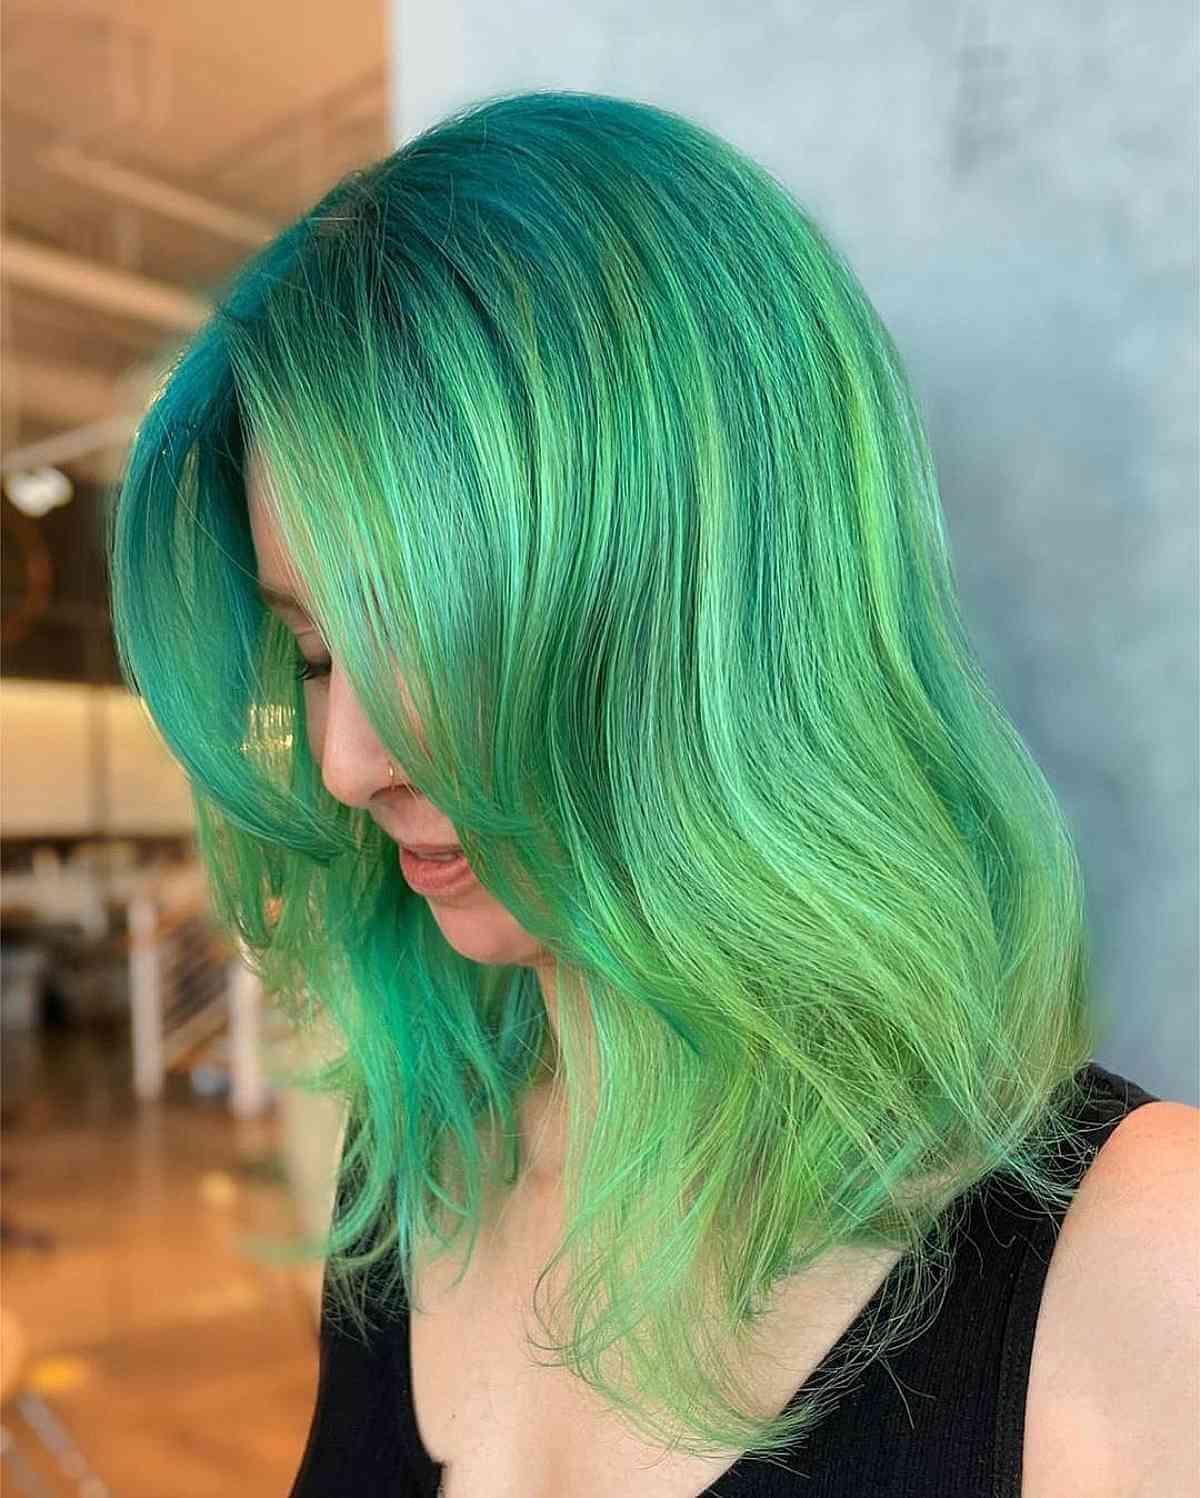 Light to Dark Green Hair Colors - 30 Ideas to See (Photos)